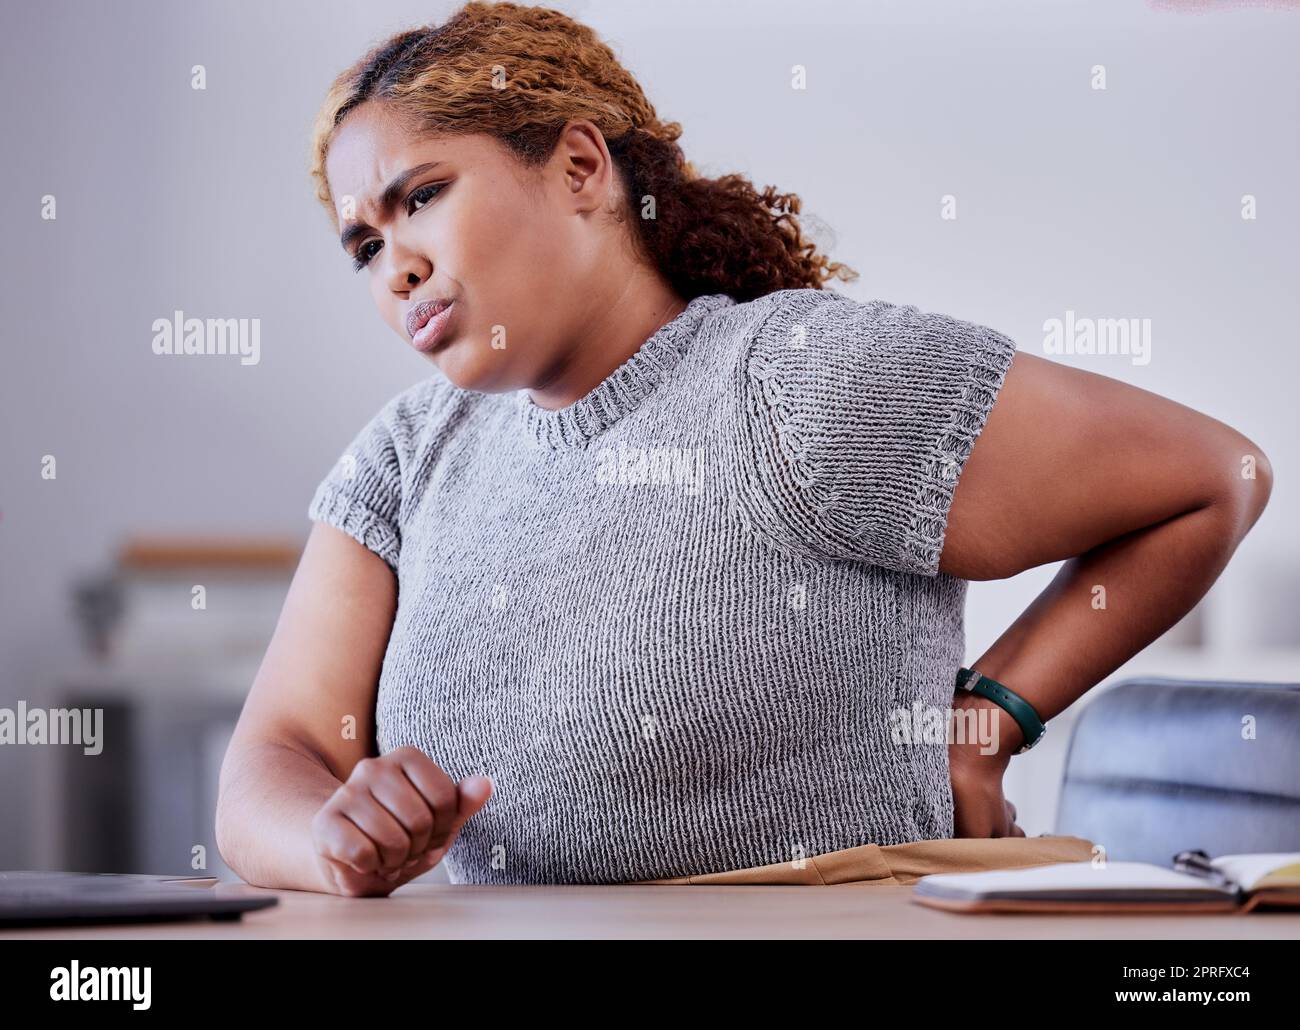 Corporate employee suffering from back pain while working at a desk in an office, uncomfortable and concerned. Young professional experience discomfort from an injury, bad posture or hurt muscle Stock Photo